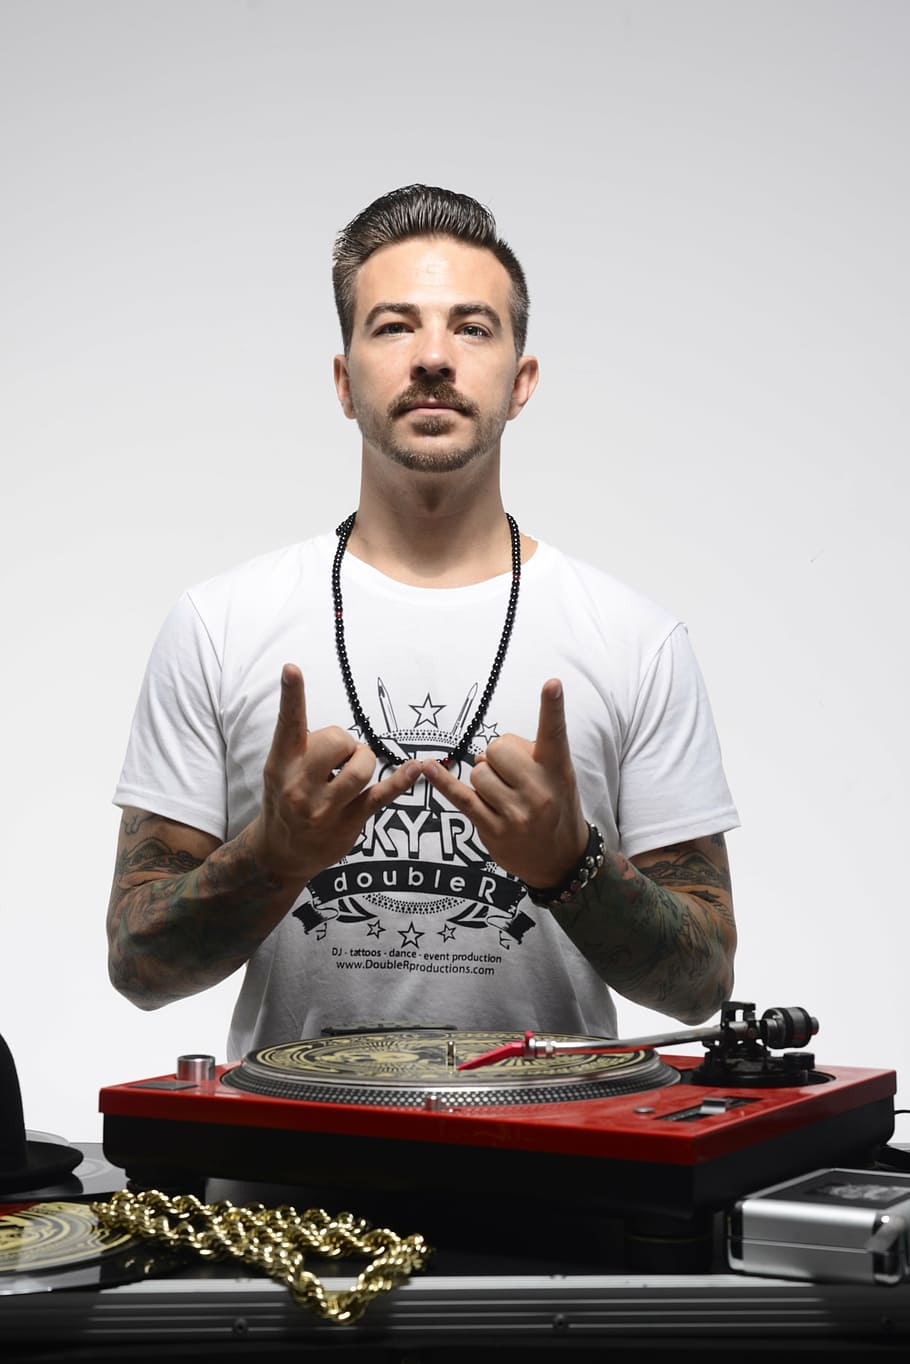 man in shirt shirt standing in front of red turntable, dj, scratch, HD wallpaper